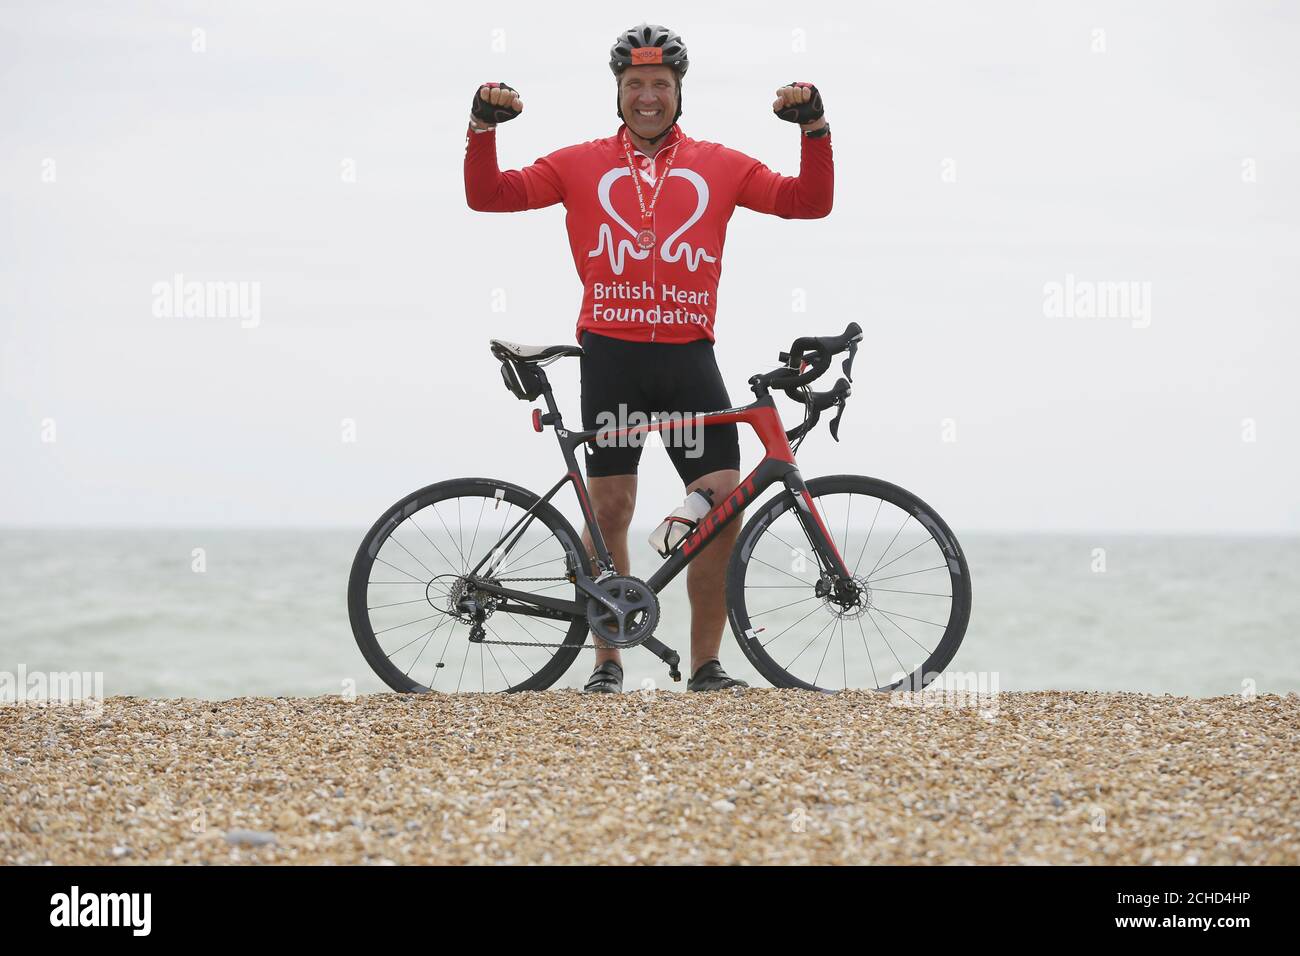 David Seaman celebrates after finishing the British Heart Foundation's London to Brighton Bike Ride 2018. PRESS ASSOCIATION. Photo. Picture date: Sunday June 17, 2018. David joined 16,000 cyclists this year, helping raise around £3million for the charity's life-saving research. Heart and circulatory disease is responsible for around 150,000 deaths each year. Photo credit should read: Tim Ireland/PA Wire Stock Photo